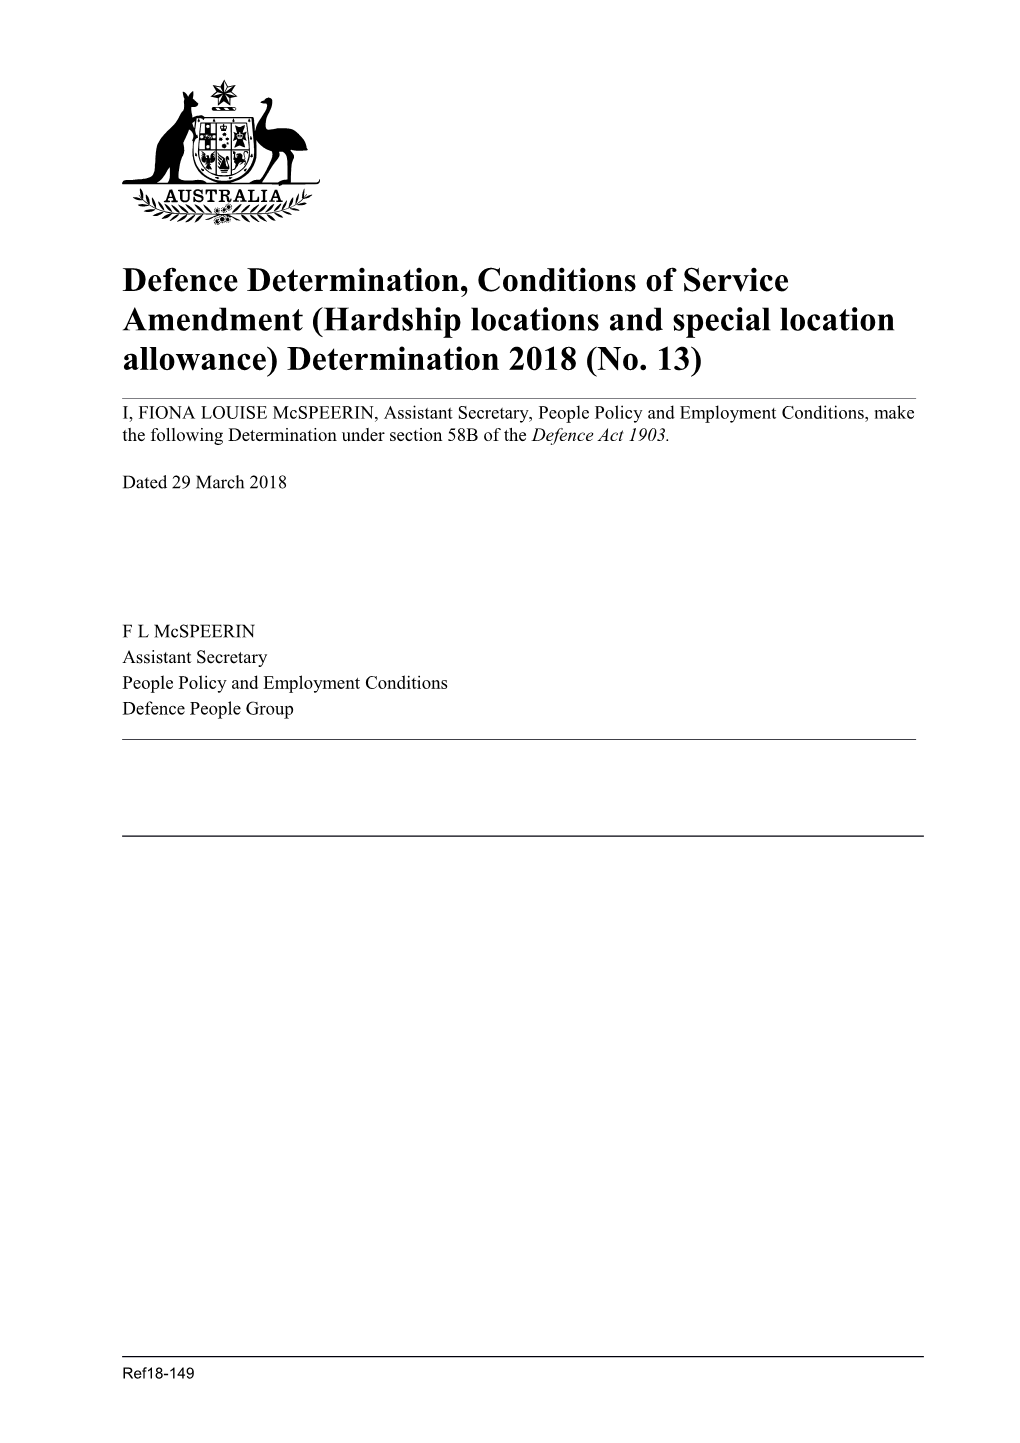 Defence Determination, Conditions of Service Amendment (Hardship Locations and Special